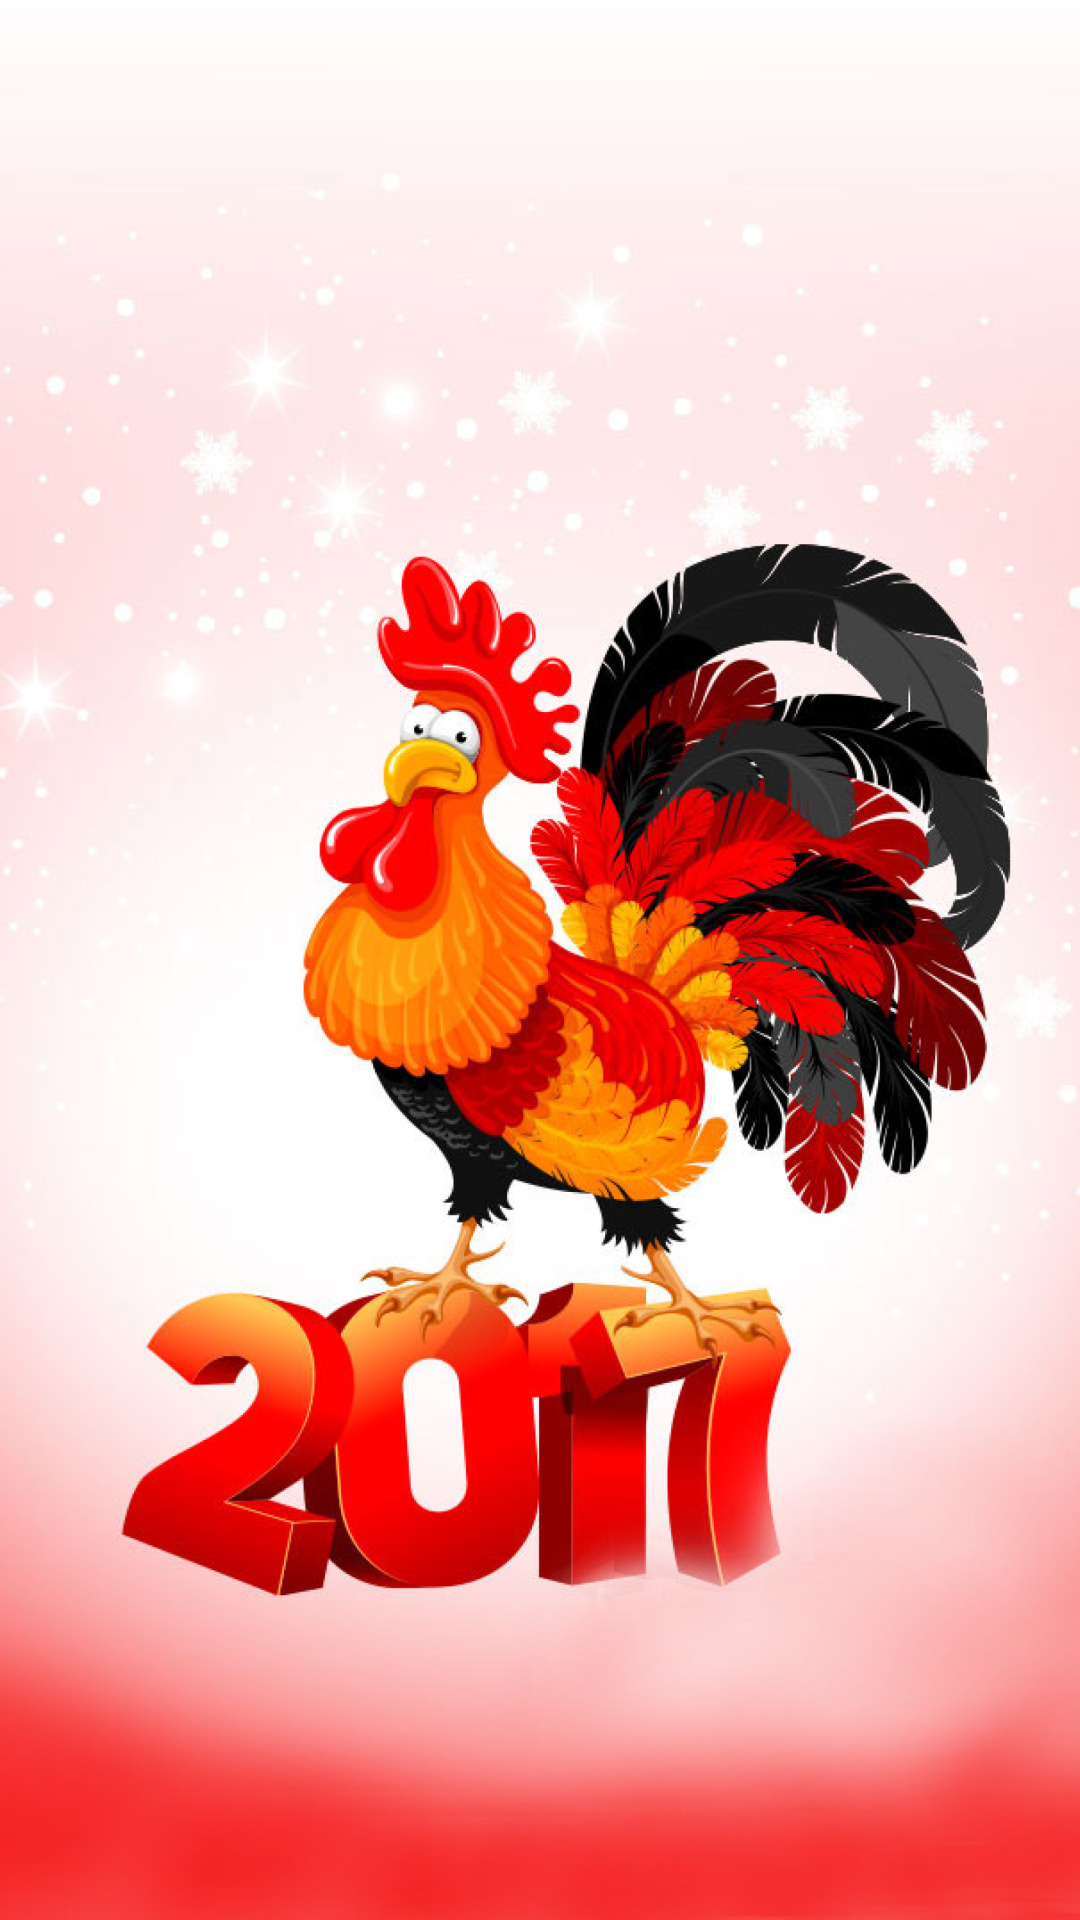 2017 New Year of Cock wallpaper 1080x1920